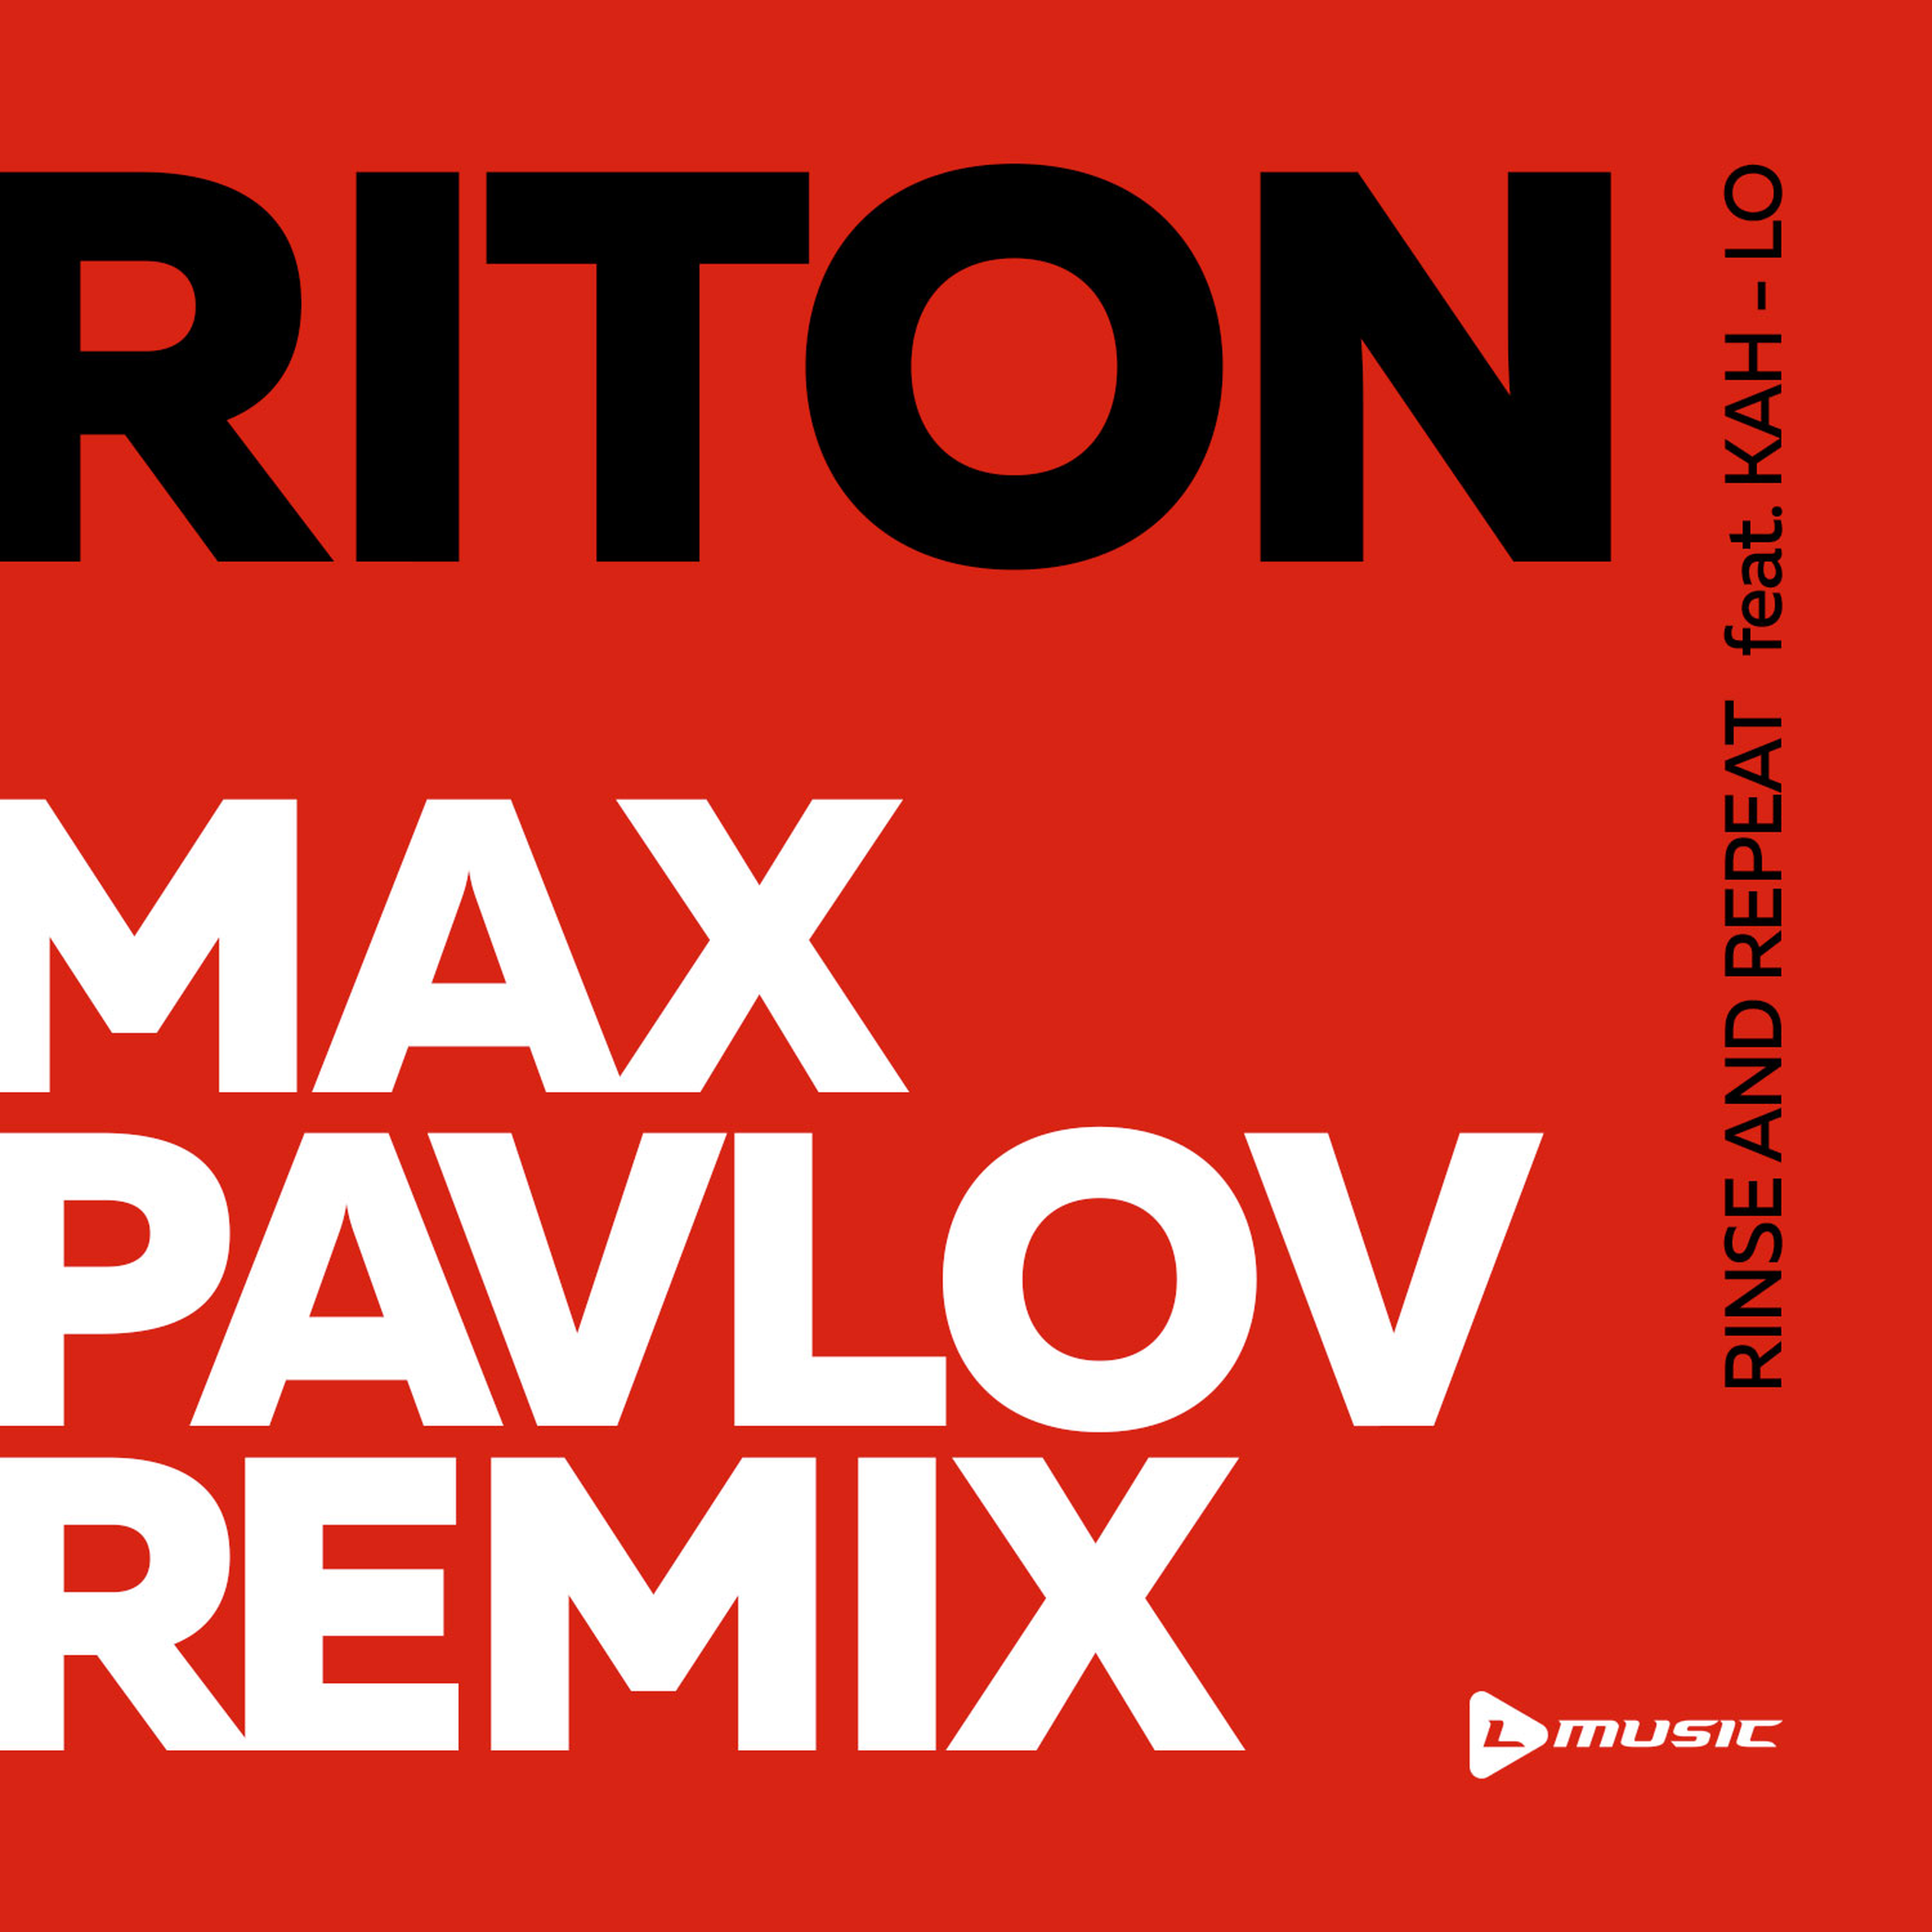 Riton, Kah-lo - Rinse & repeat. Rinse and repeat. Rinse and repeat game. Riton time. Wallem харизма ramirez pavlov remix